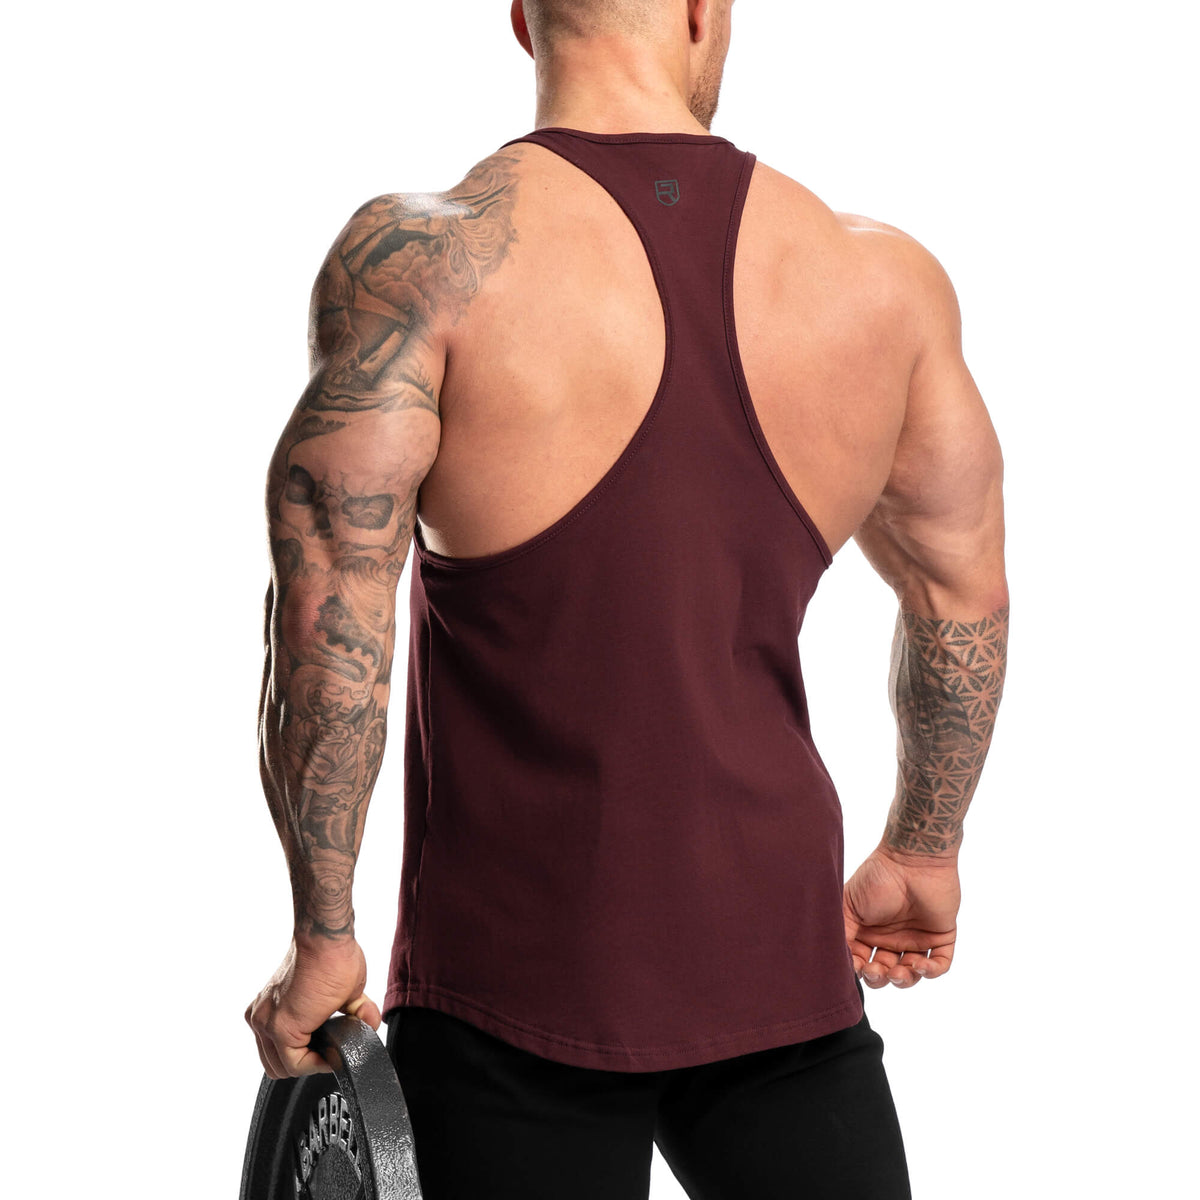 Style 904 - Men's Y Back Stringer Tank Top. ONLY 14.95 Seen worn in the  cult classic film Pain & Gain.